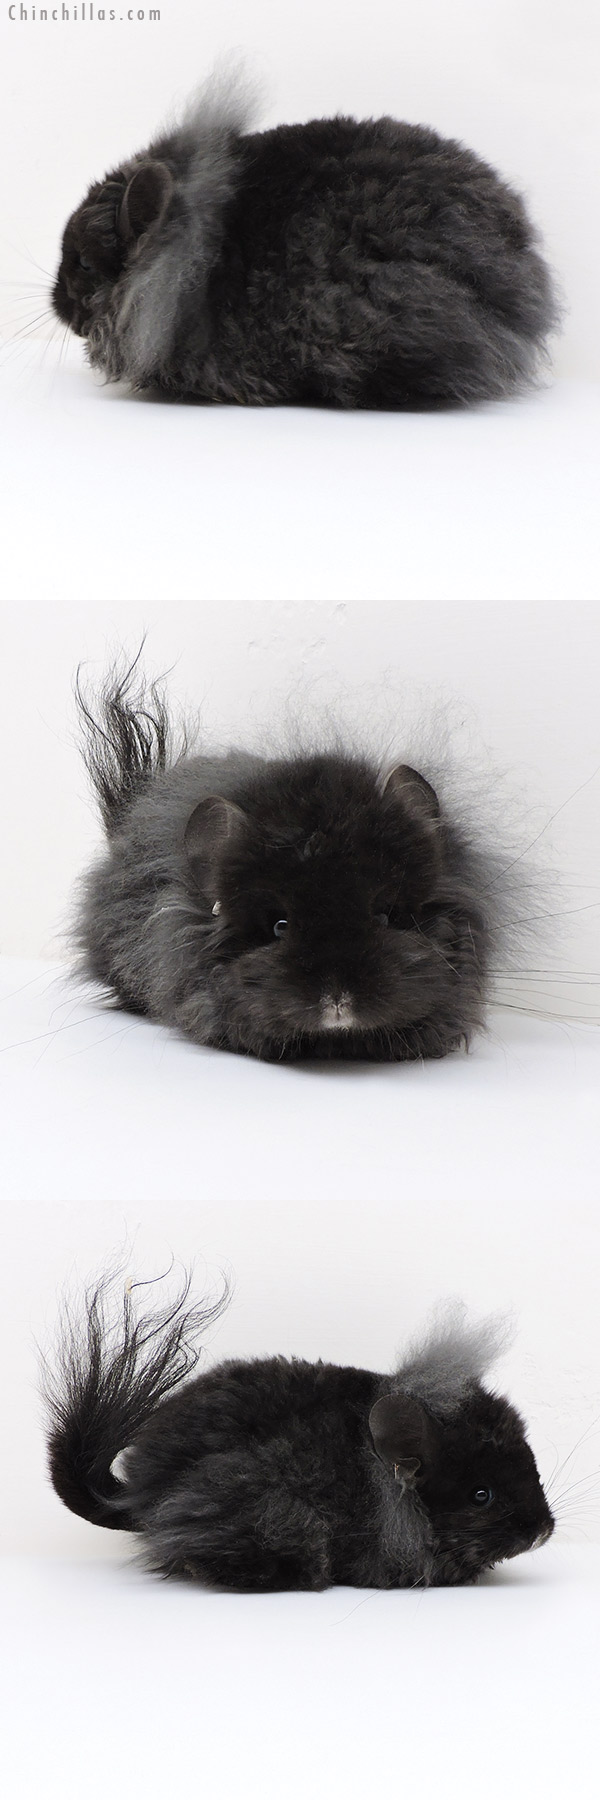 Chinchilla or related item offered for sale or export on Chinchillas.com - 18130 Exceptional G2  Royal Imperial Angora Female Chinchilla